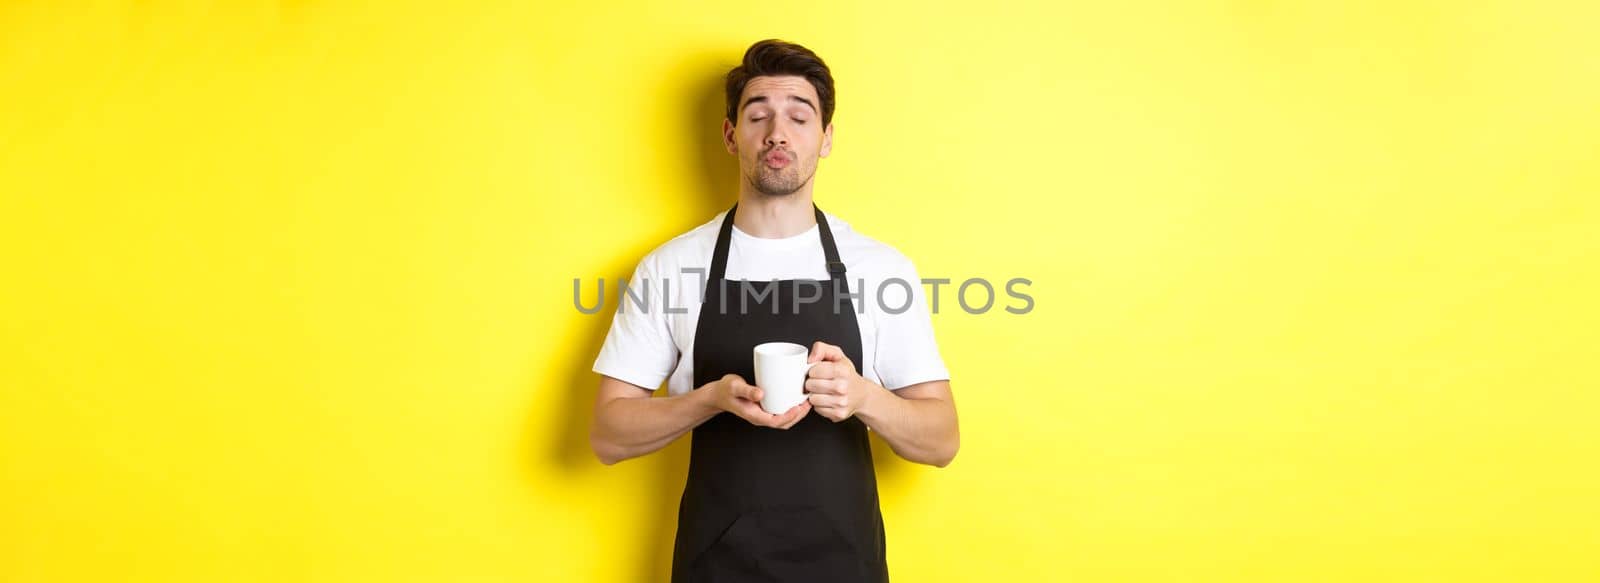 Man in black apron bringing cup of coffee and waiting for kiss, standing over yellow background.